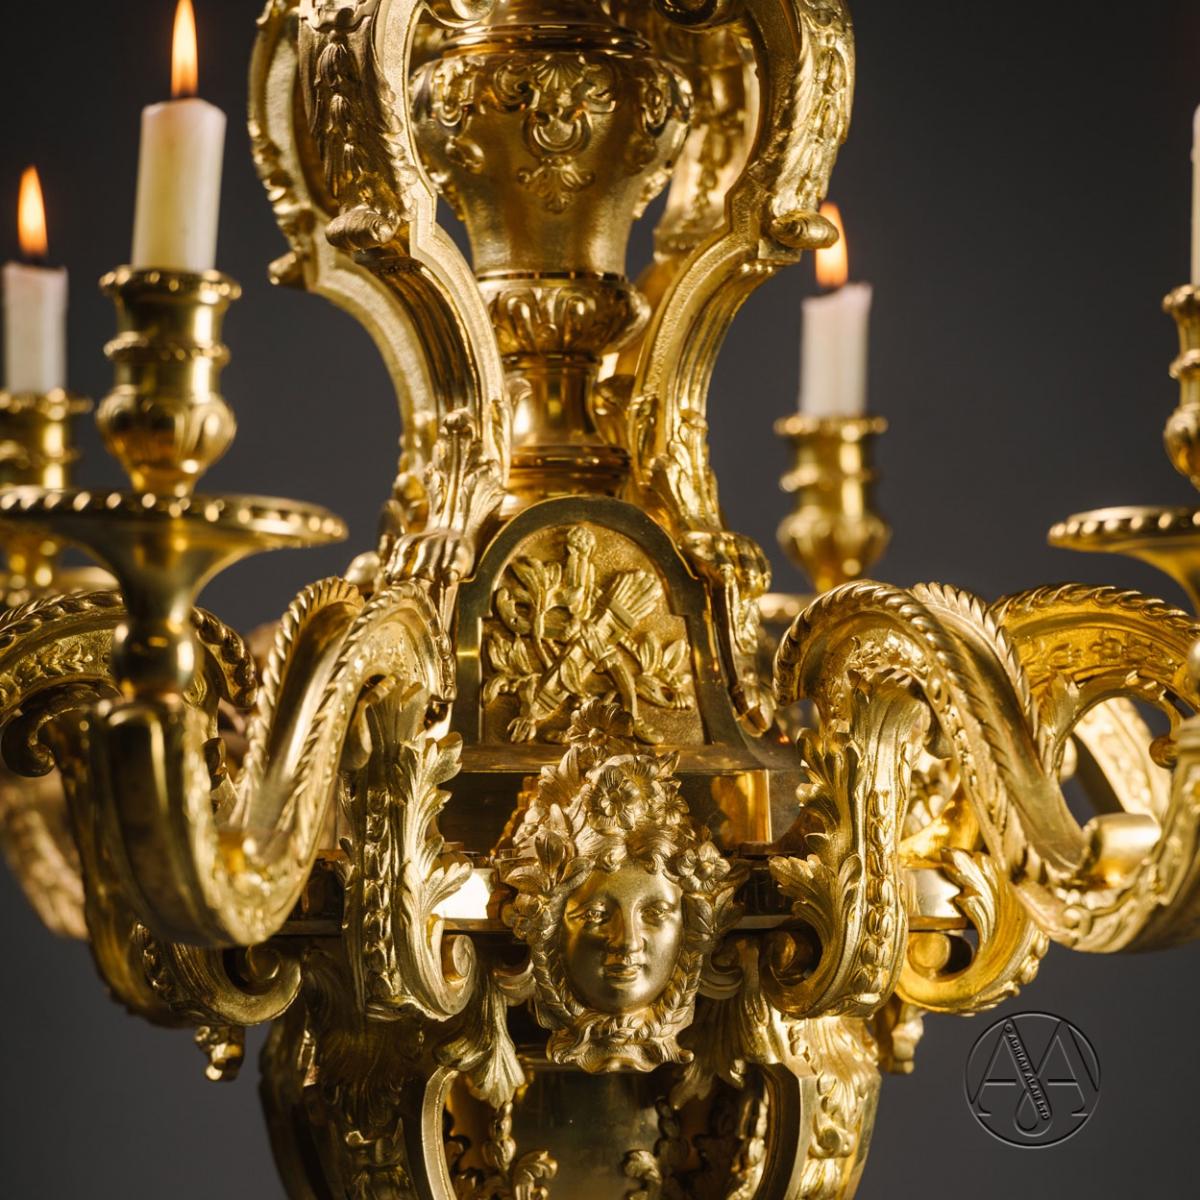 A Detail of A Napoleon III Gilt-Bronze Eight-Light Chandelier After Boulle Dating From Circa 1870